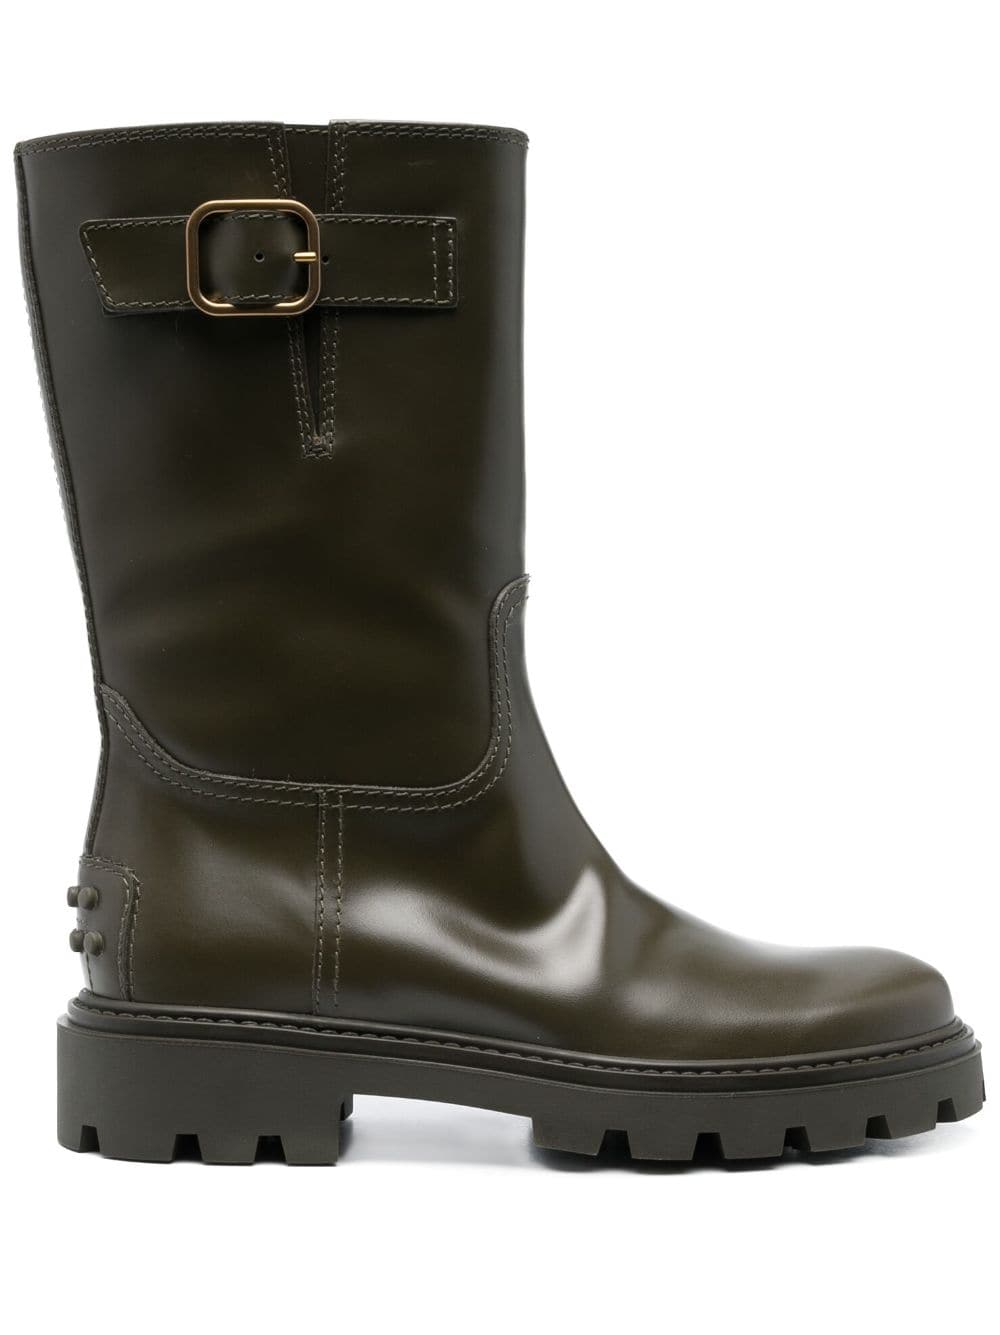 Tod's buckle-detail leather boots - Green von Tod's